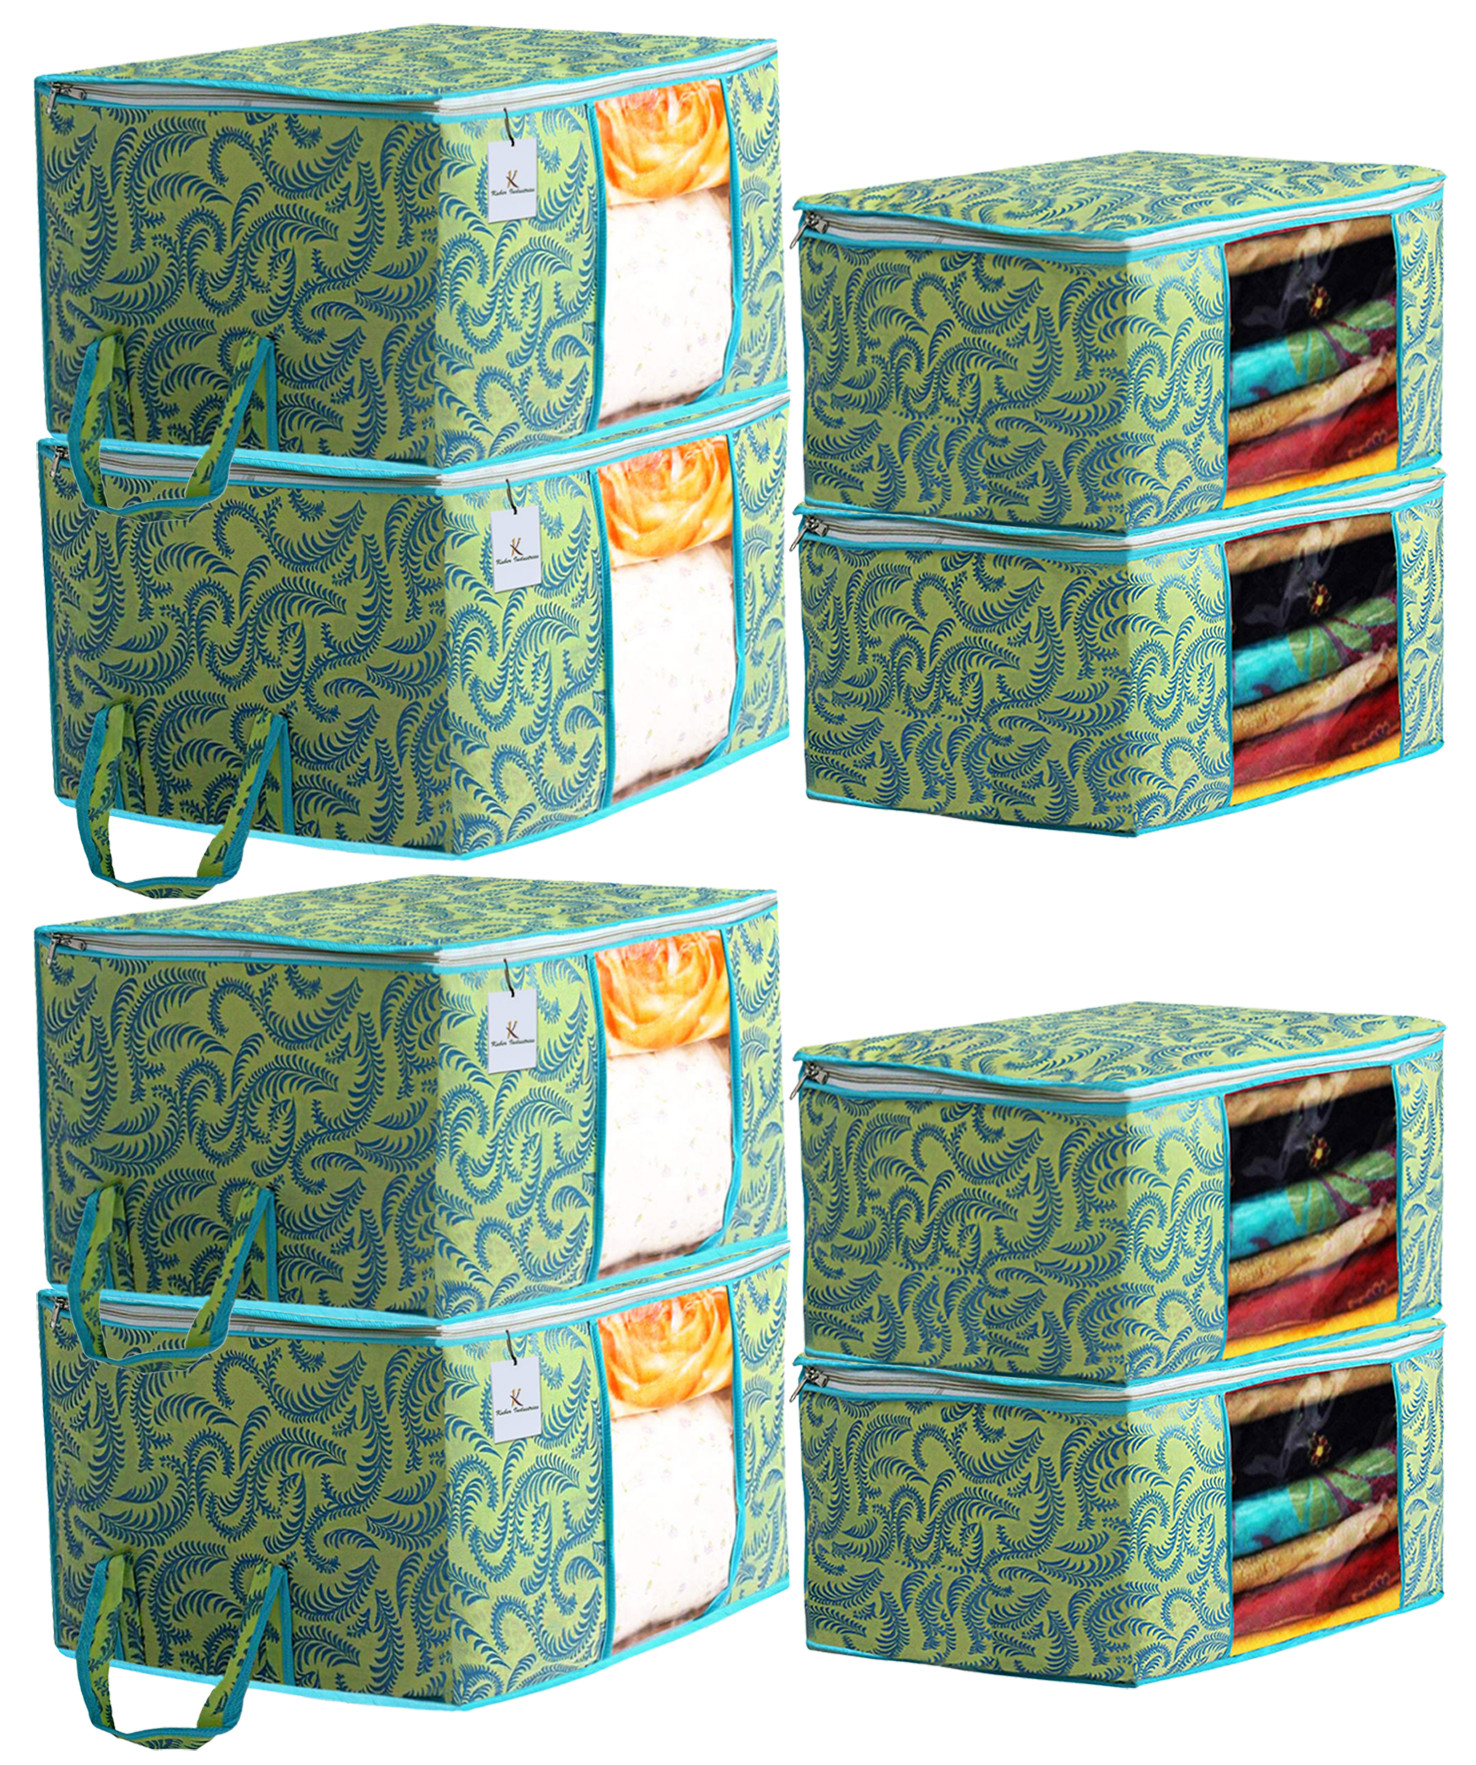 Kuber Industries Metallic Printed Non Woven Saree Cover And Underbed Storage Bag, Cloth Organizer For Storage, Blanket Cover Combo Set (Green) -CTKTC38523